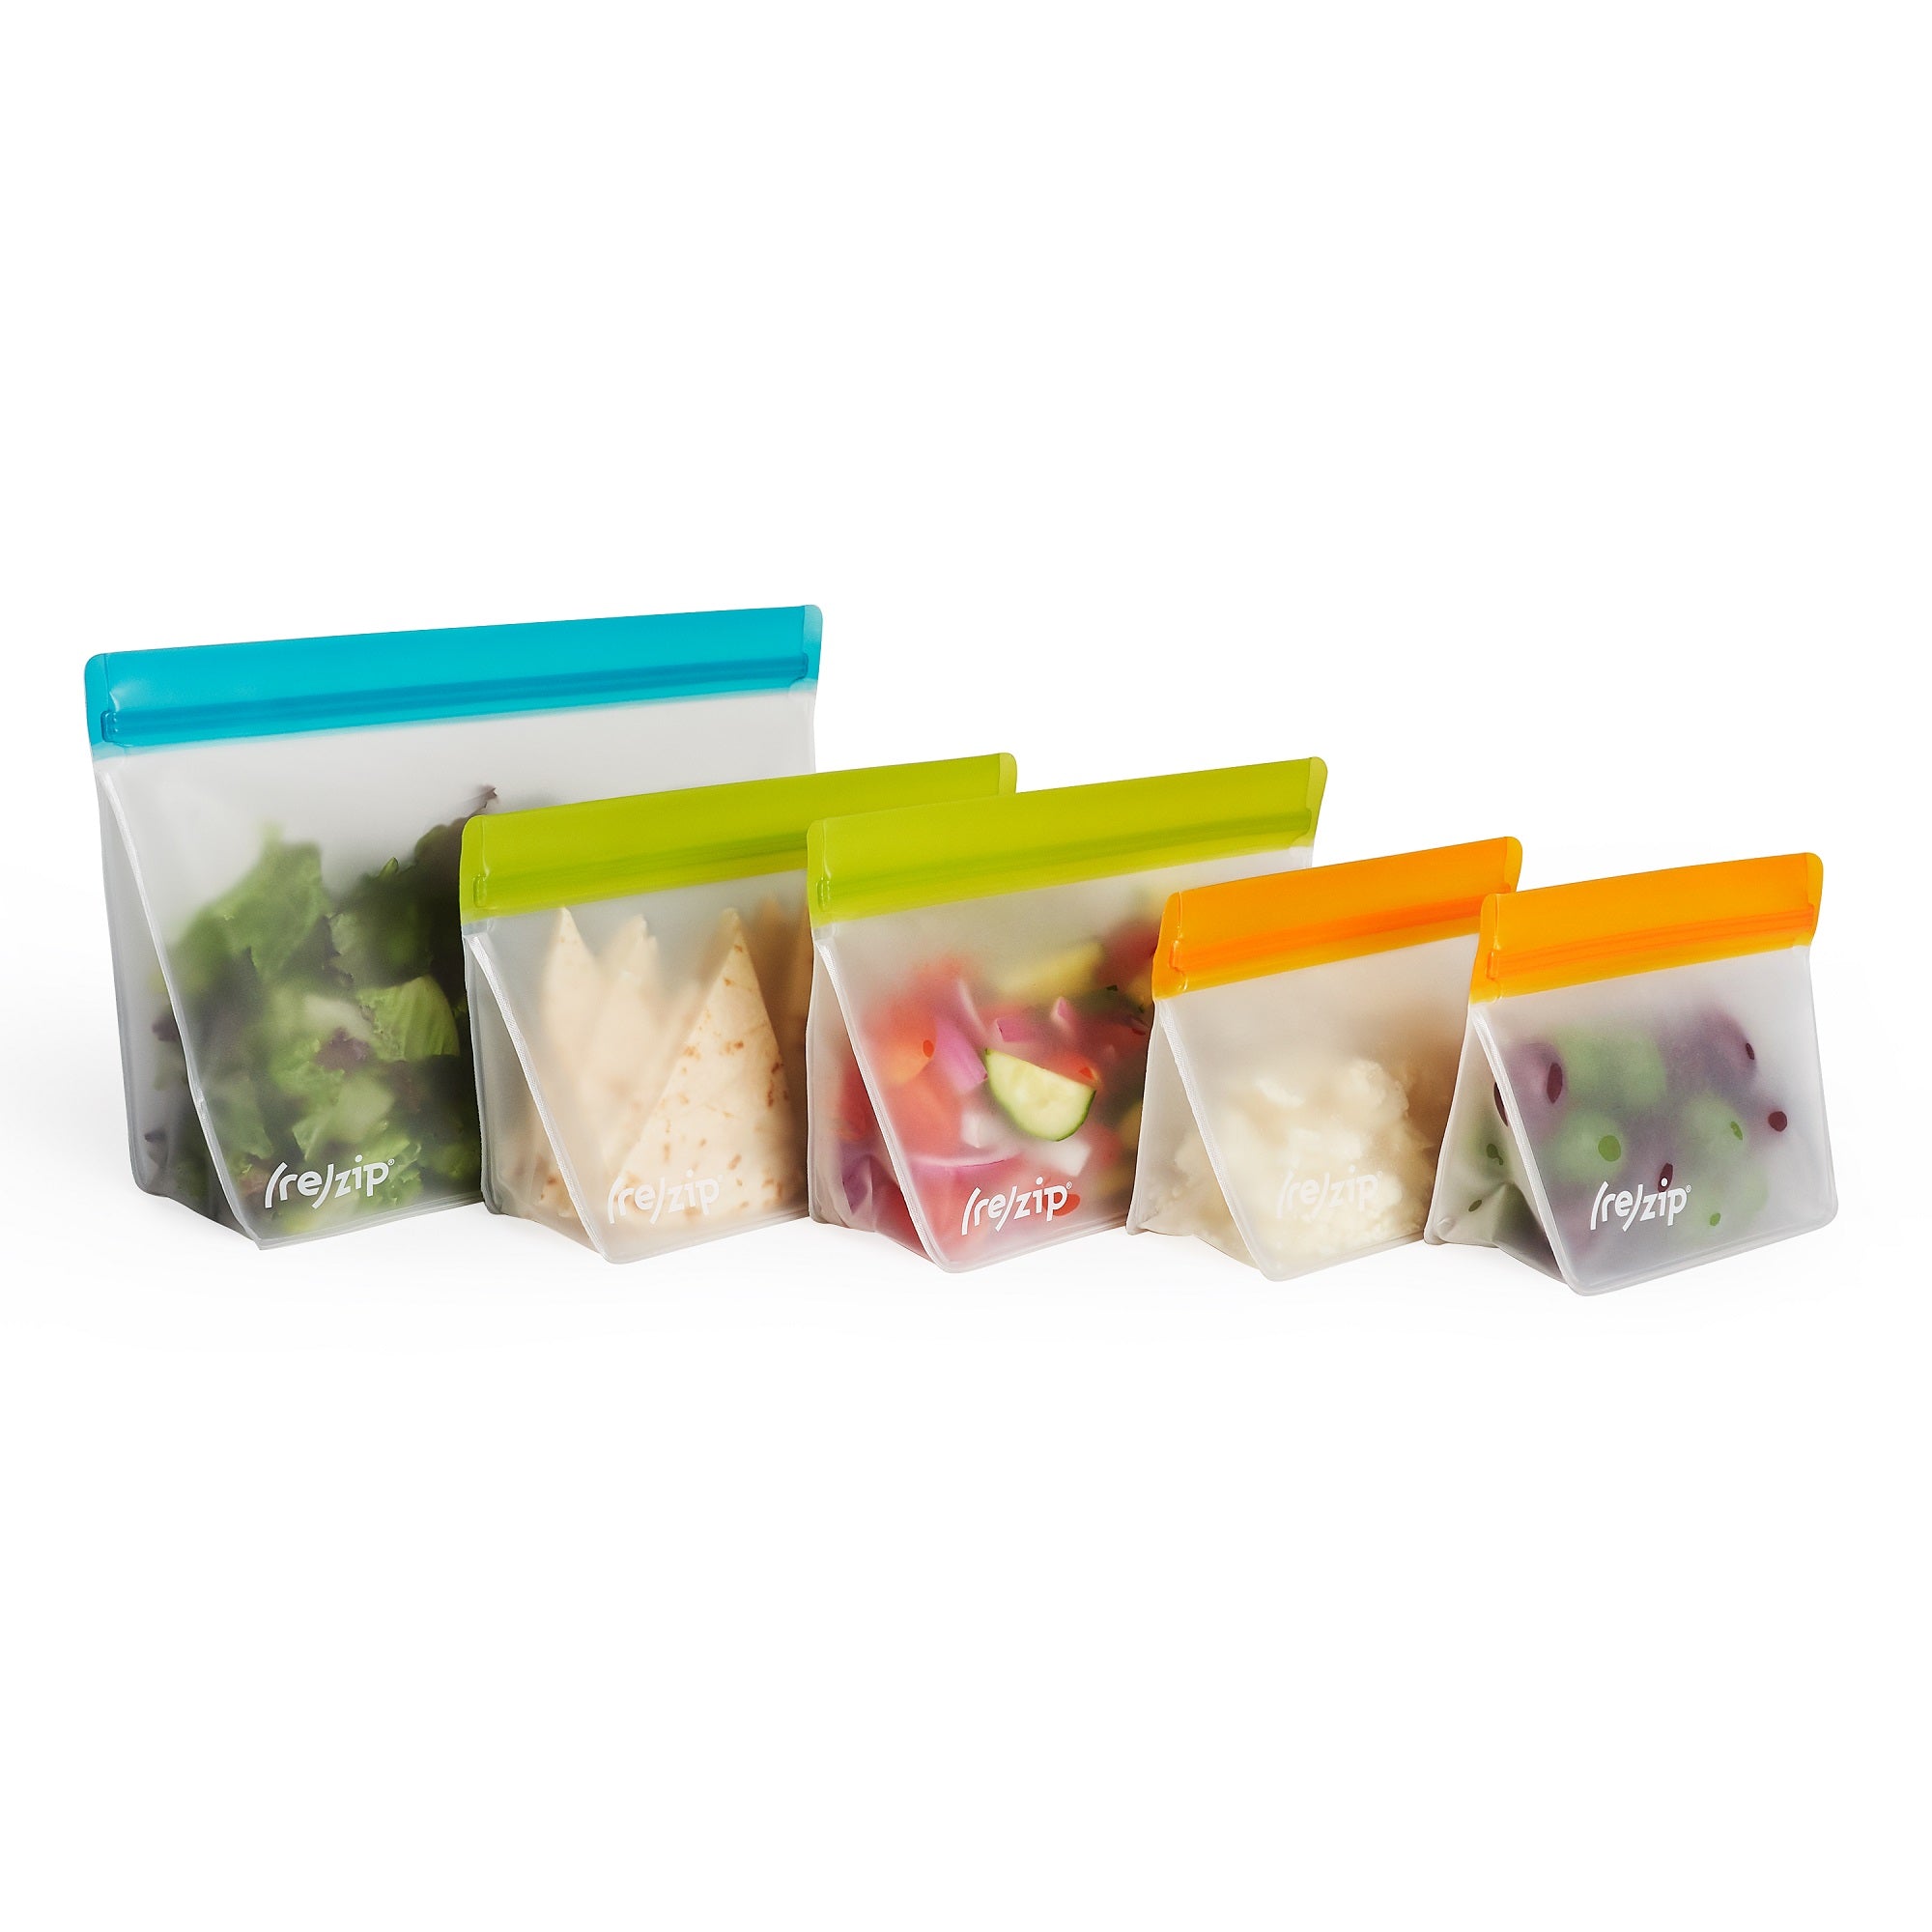 (re)zip Reusable Leak-proof Food Storage Stand-Up Bag Kit - Snack, 2-Cup,  Quart - Clear - 3pc